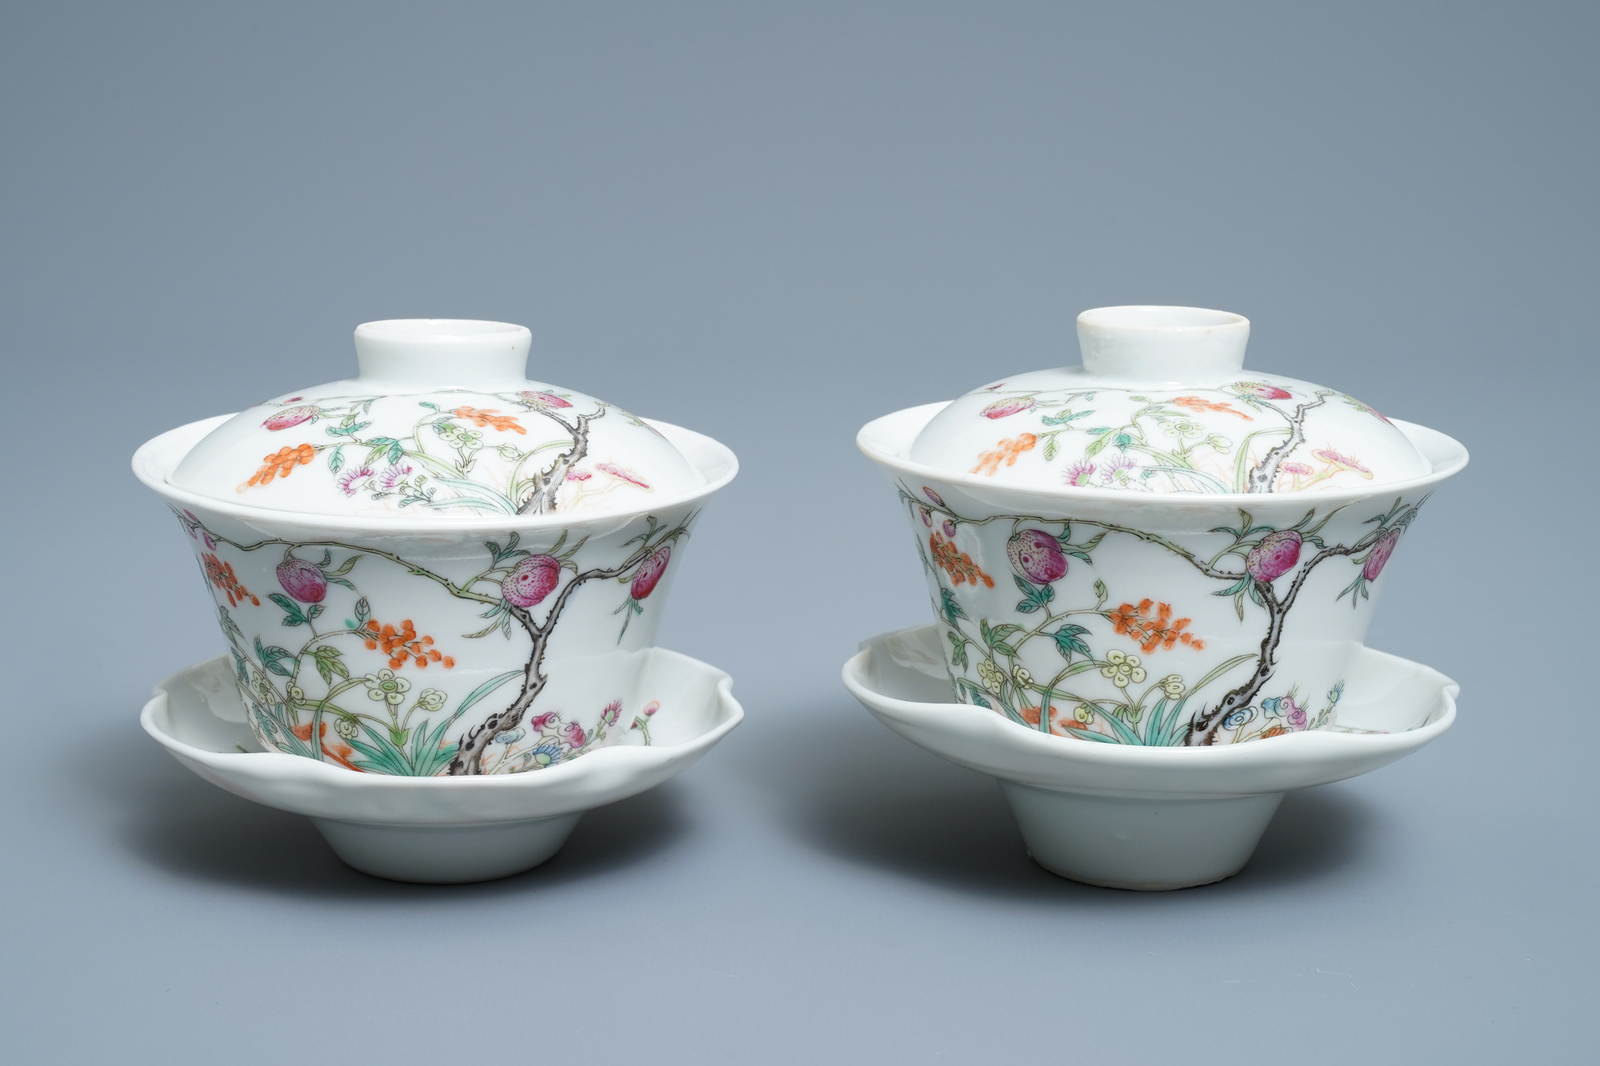 A varied collection of Chinese qianjiang cai, famille rose and blue and white porcelain, 19/20th C. - Image 11 of 20